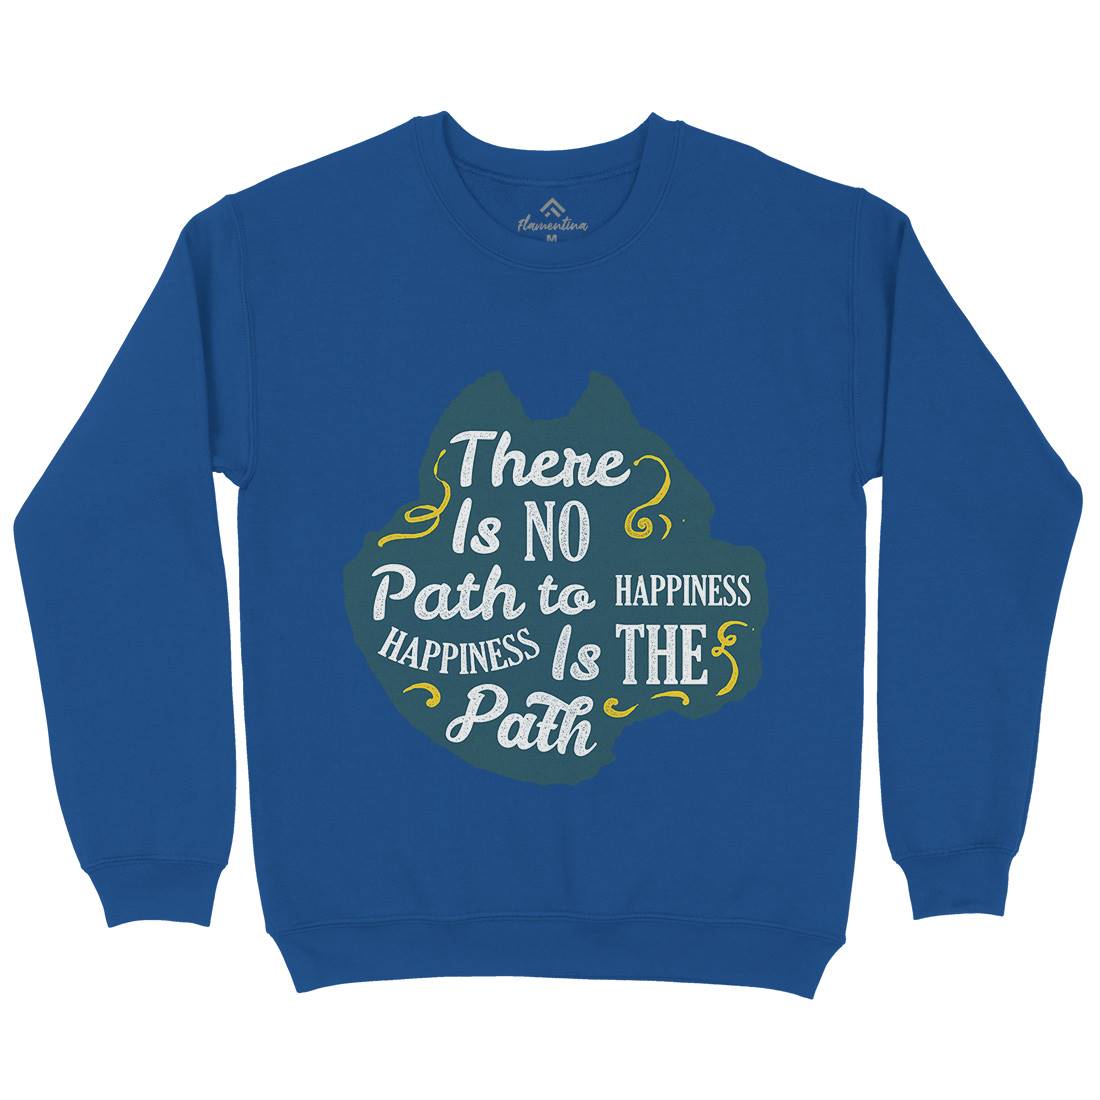 There Is No Path Kids Crew Neck Sweatshirt Religion A387